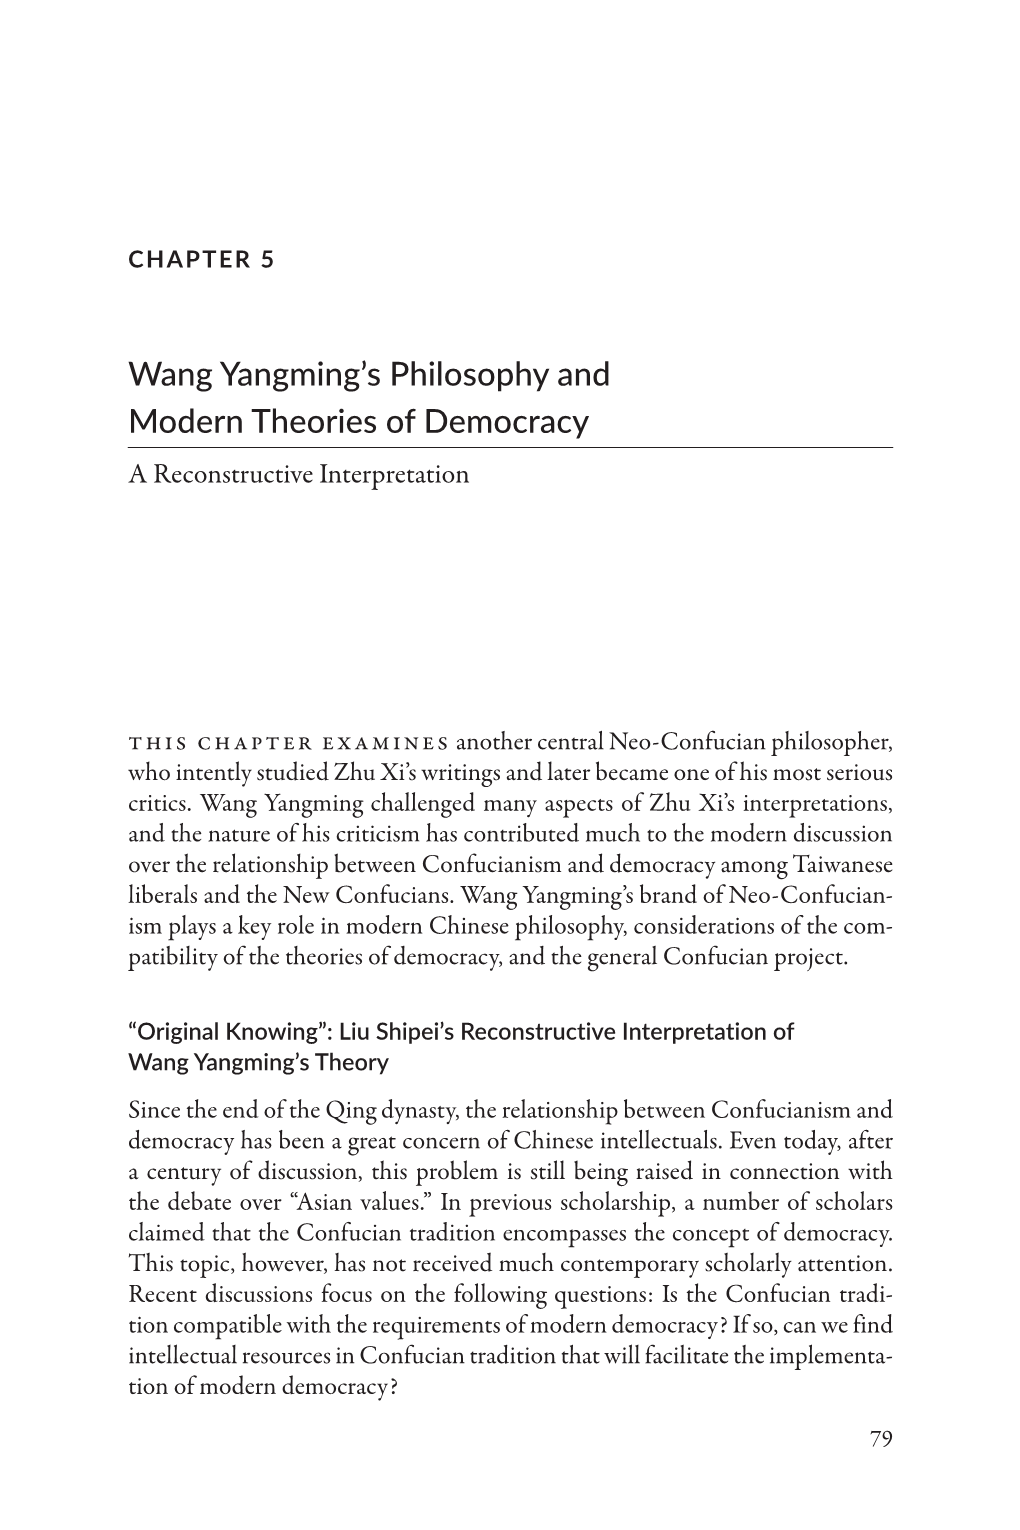 Wang Yangming's Philosophy and Modern Theories of Democracy